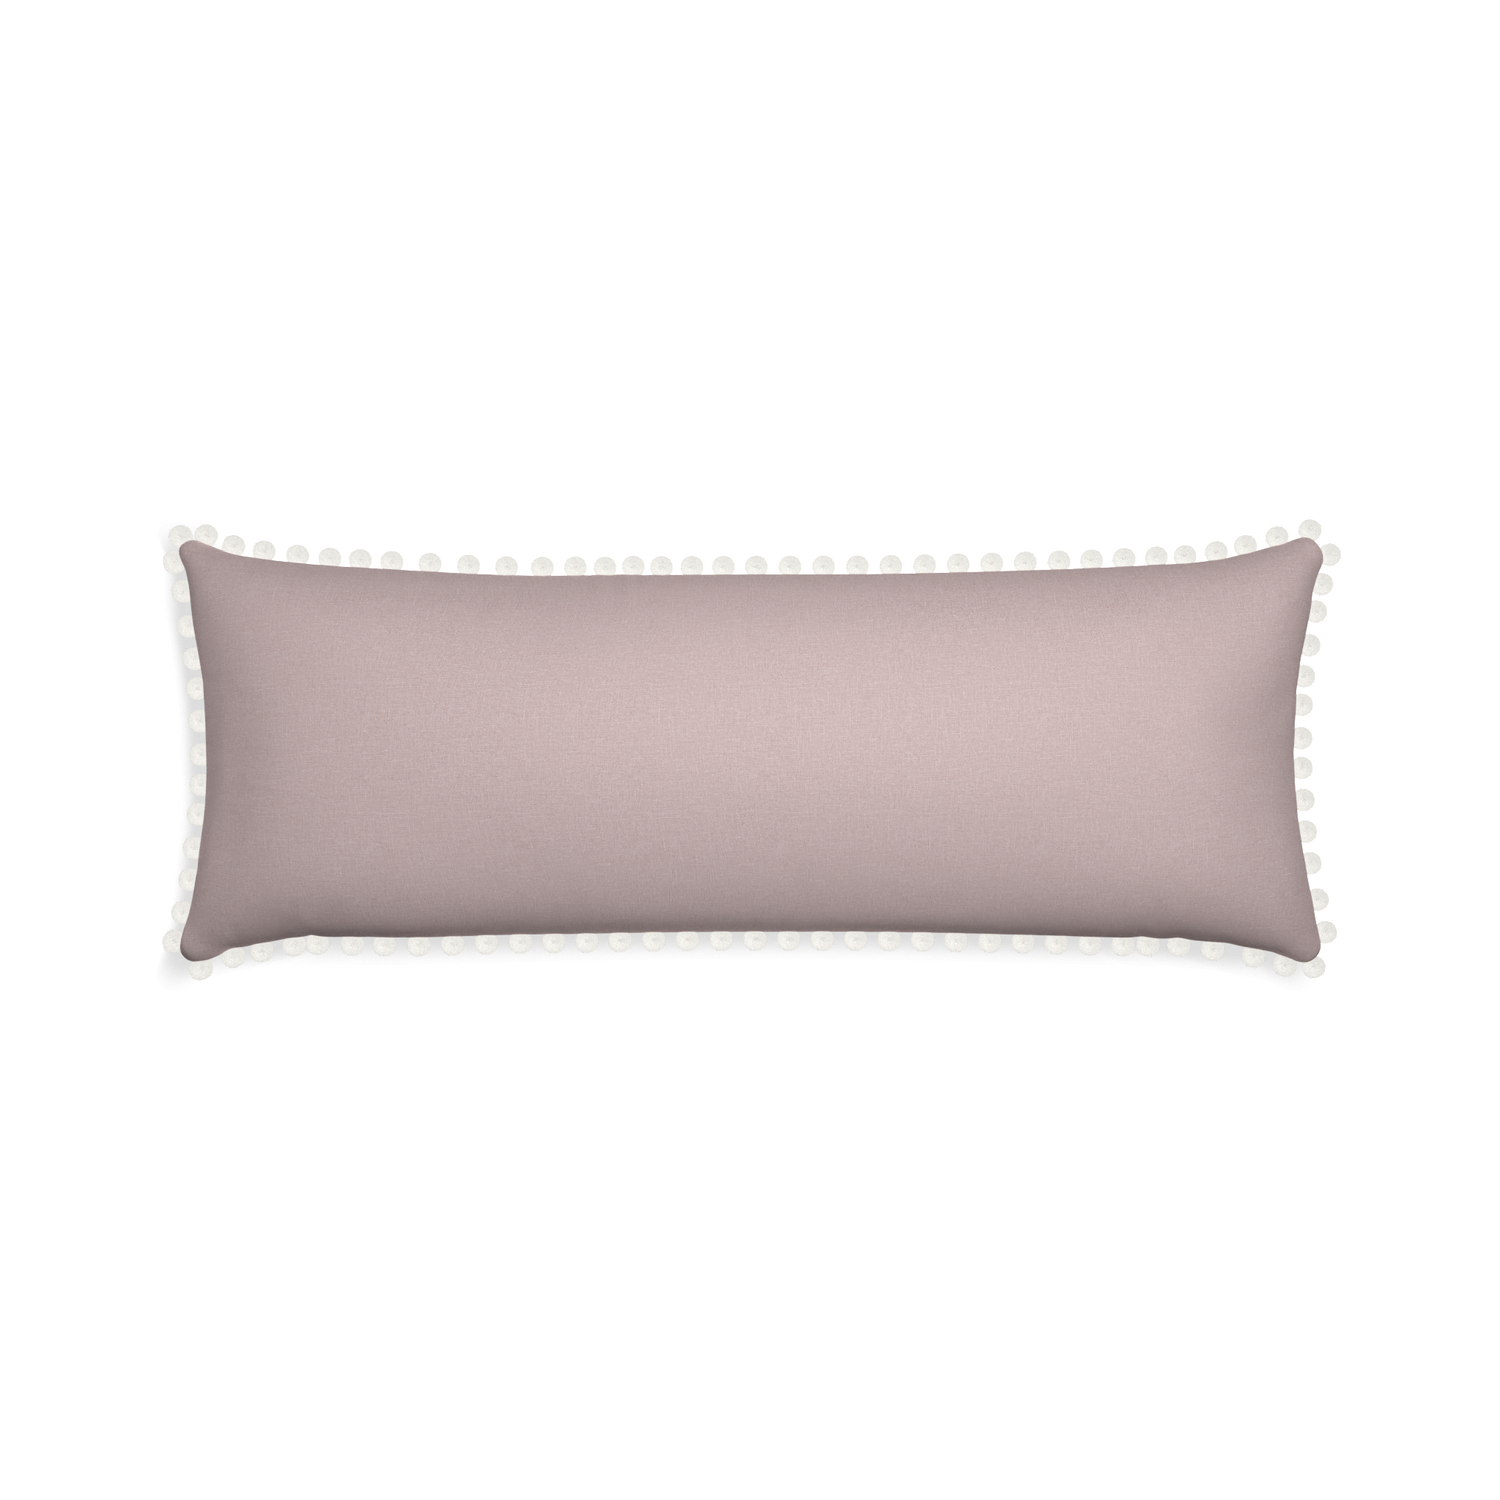 Xl-lumbar orchid custom mauve pinkpillow with snow pom pom on white background